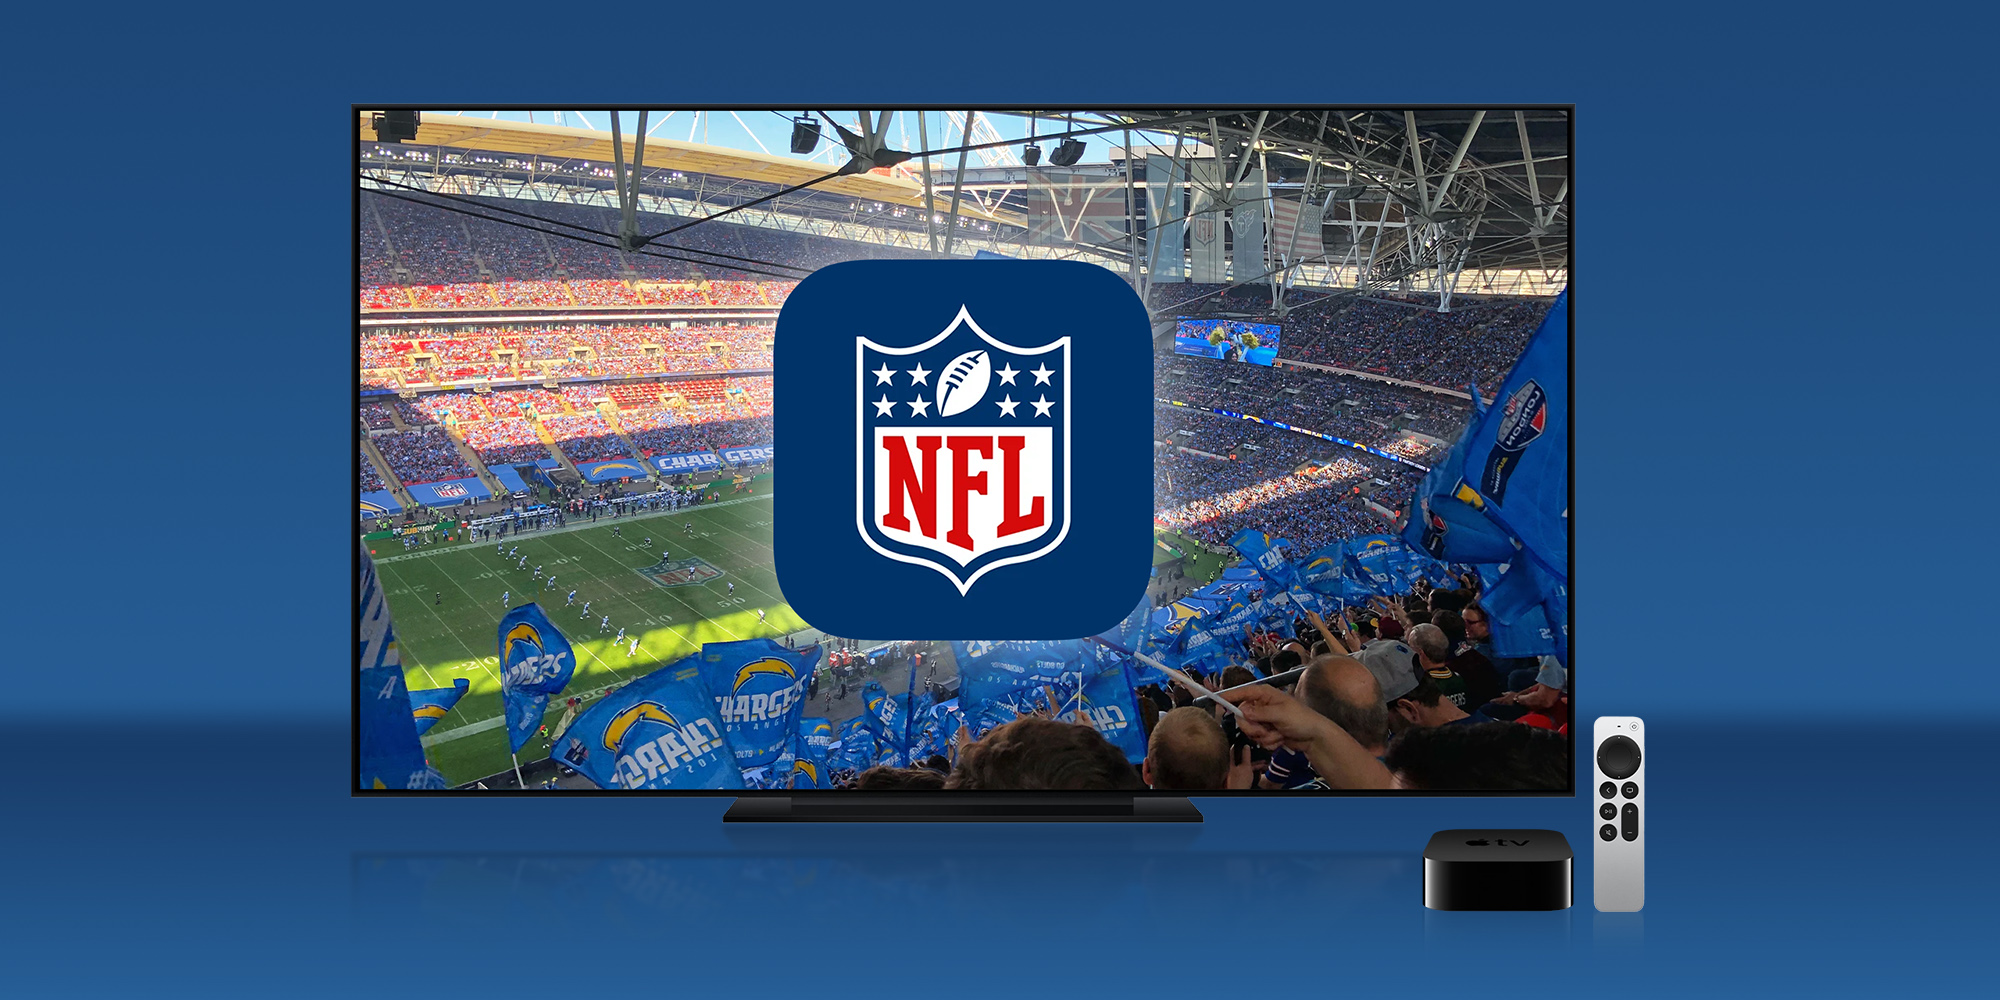 NFL Sunday Ticket could be coming to Apple TV+